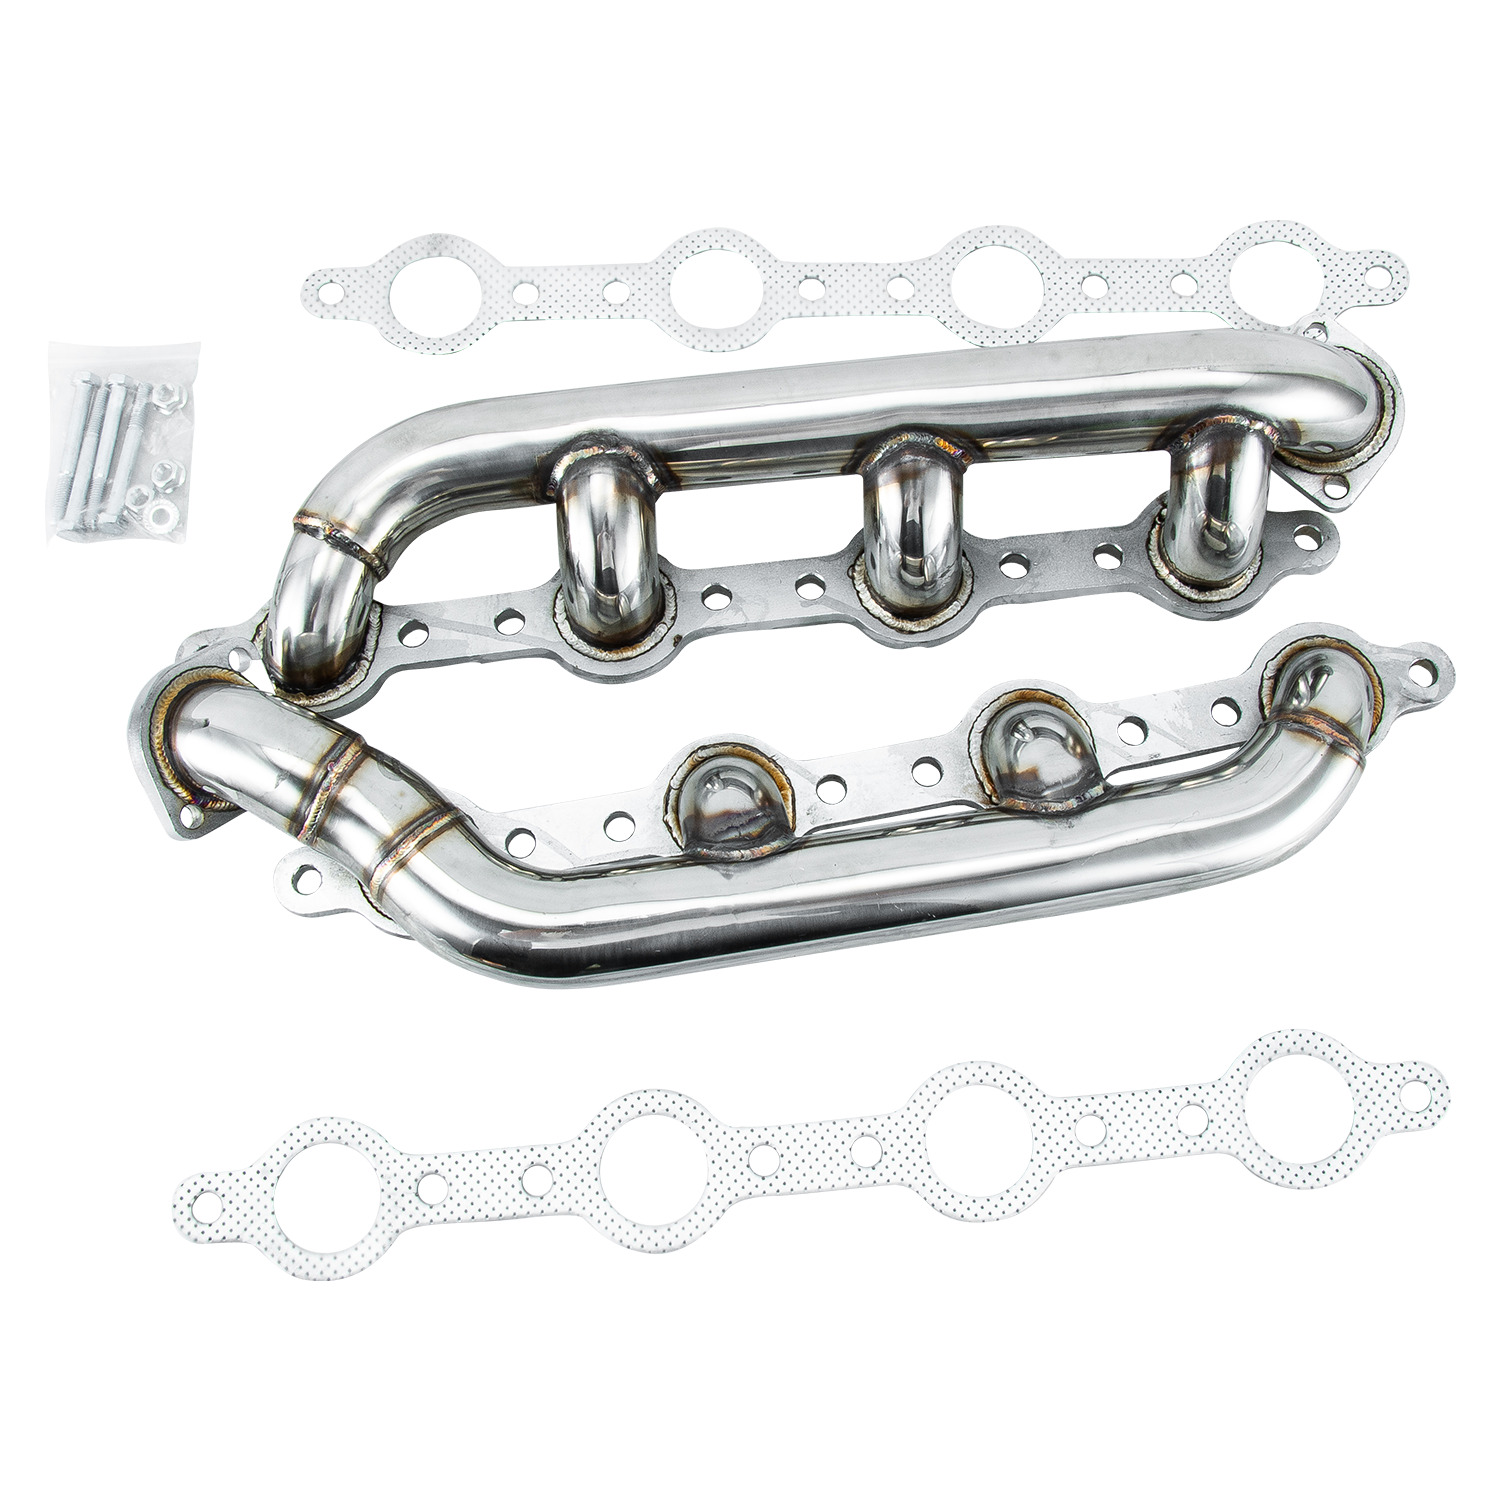 Stainless Steel Headers Manifolds For 1999-2003 2000 Ford F250 F350 F-450 7.3L